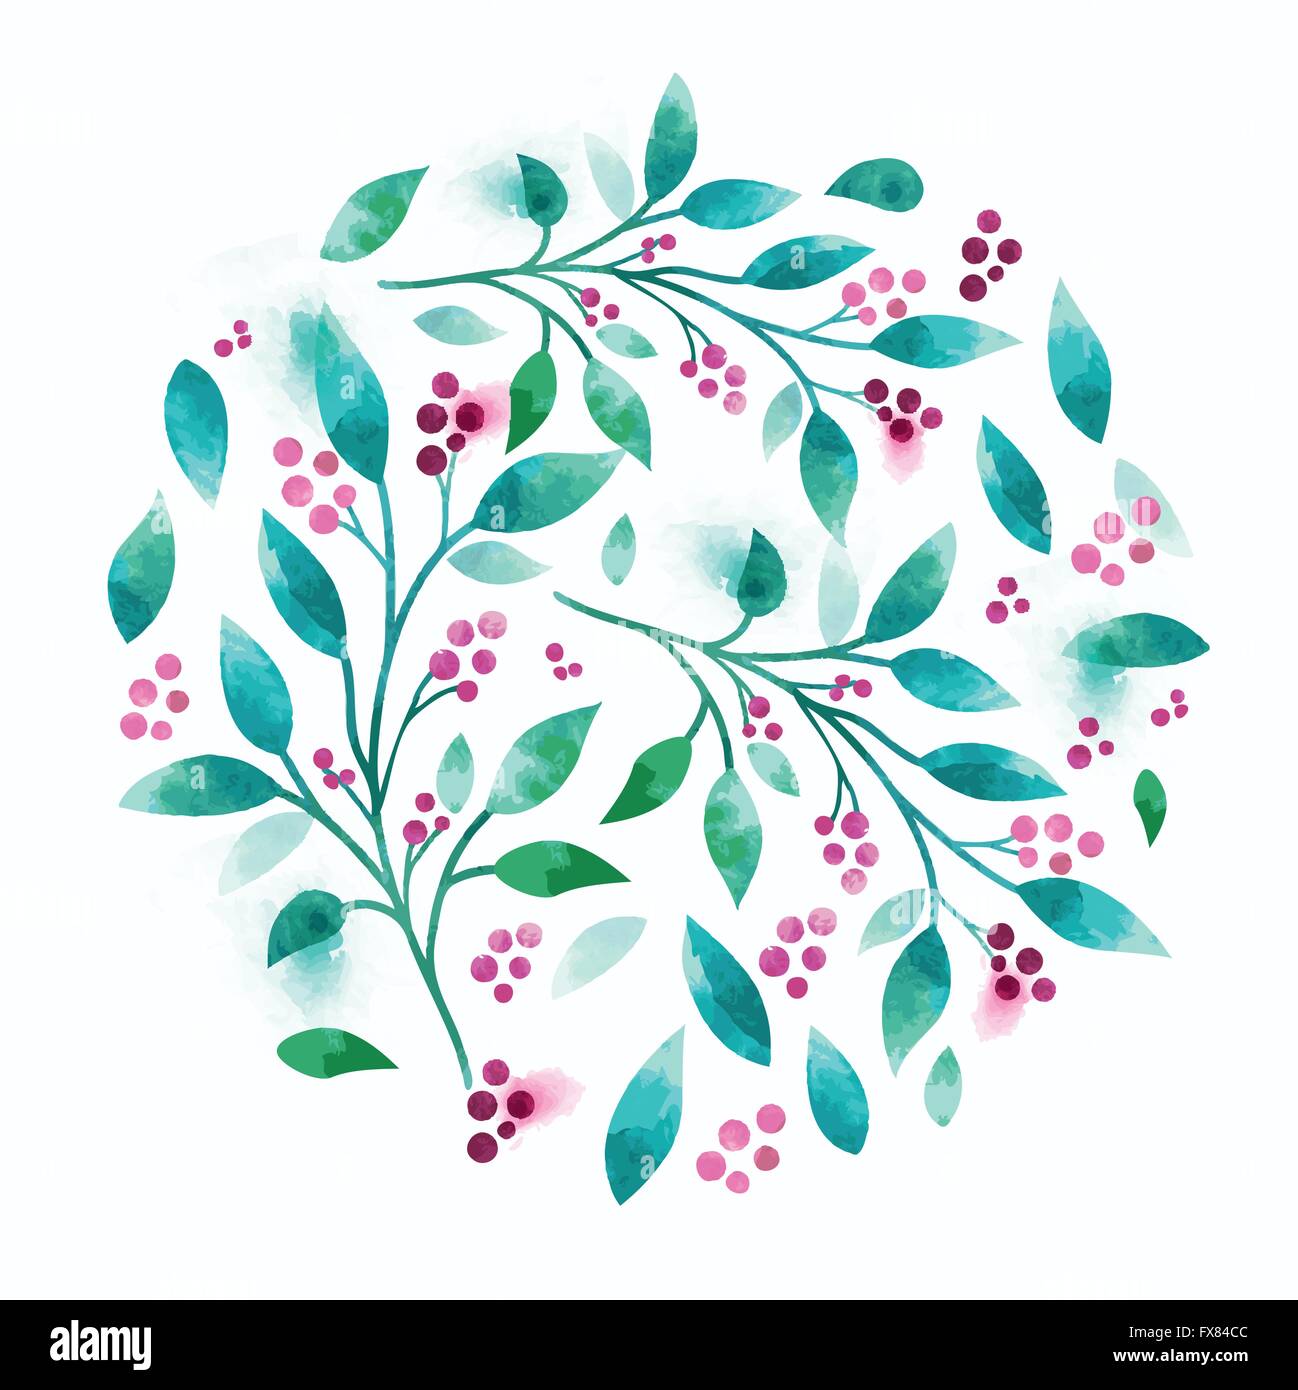 Floral Vector Watercolour. textured floral elements with pink berries. Vector illustration. Stock Vector